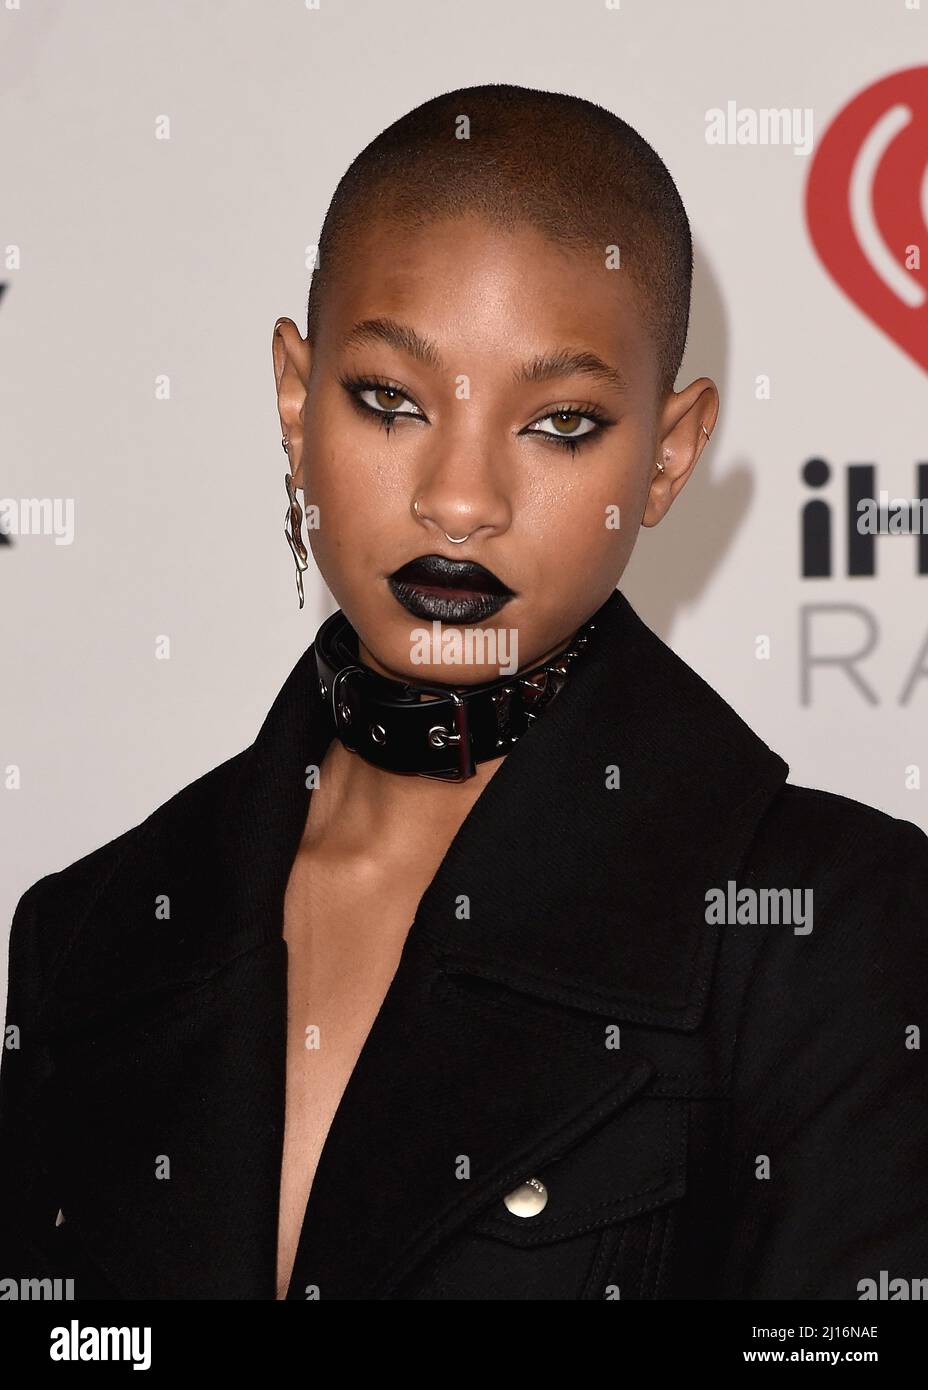 2022 IHEARTRADIO MUSIC AWARDS: Willow Smith at the 2021 “iHeartRadio Music Awards” airing live from The Shrine Auditorium in Los Angeles, Tuesday, March 22 (8:00-10:00 PM ET Live/PT tape-delayed) on FOX. CR: Scott Kirkland/PictureGroup/Sipa USA for FOX. Credit: 2022 FOX MEDIA, LLC. Credit: Sipa USA/Alamy Live News Stock Photo